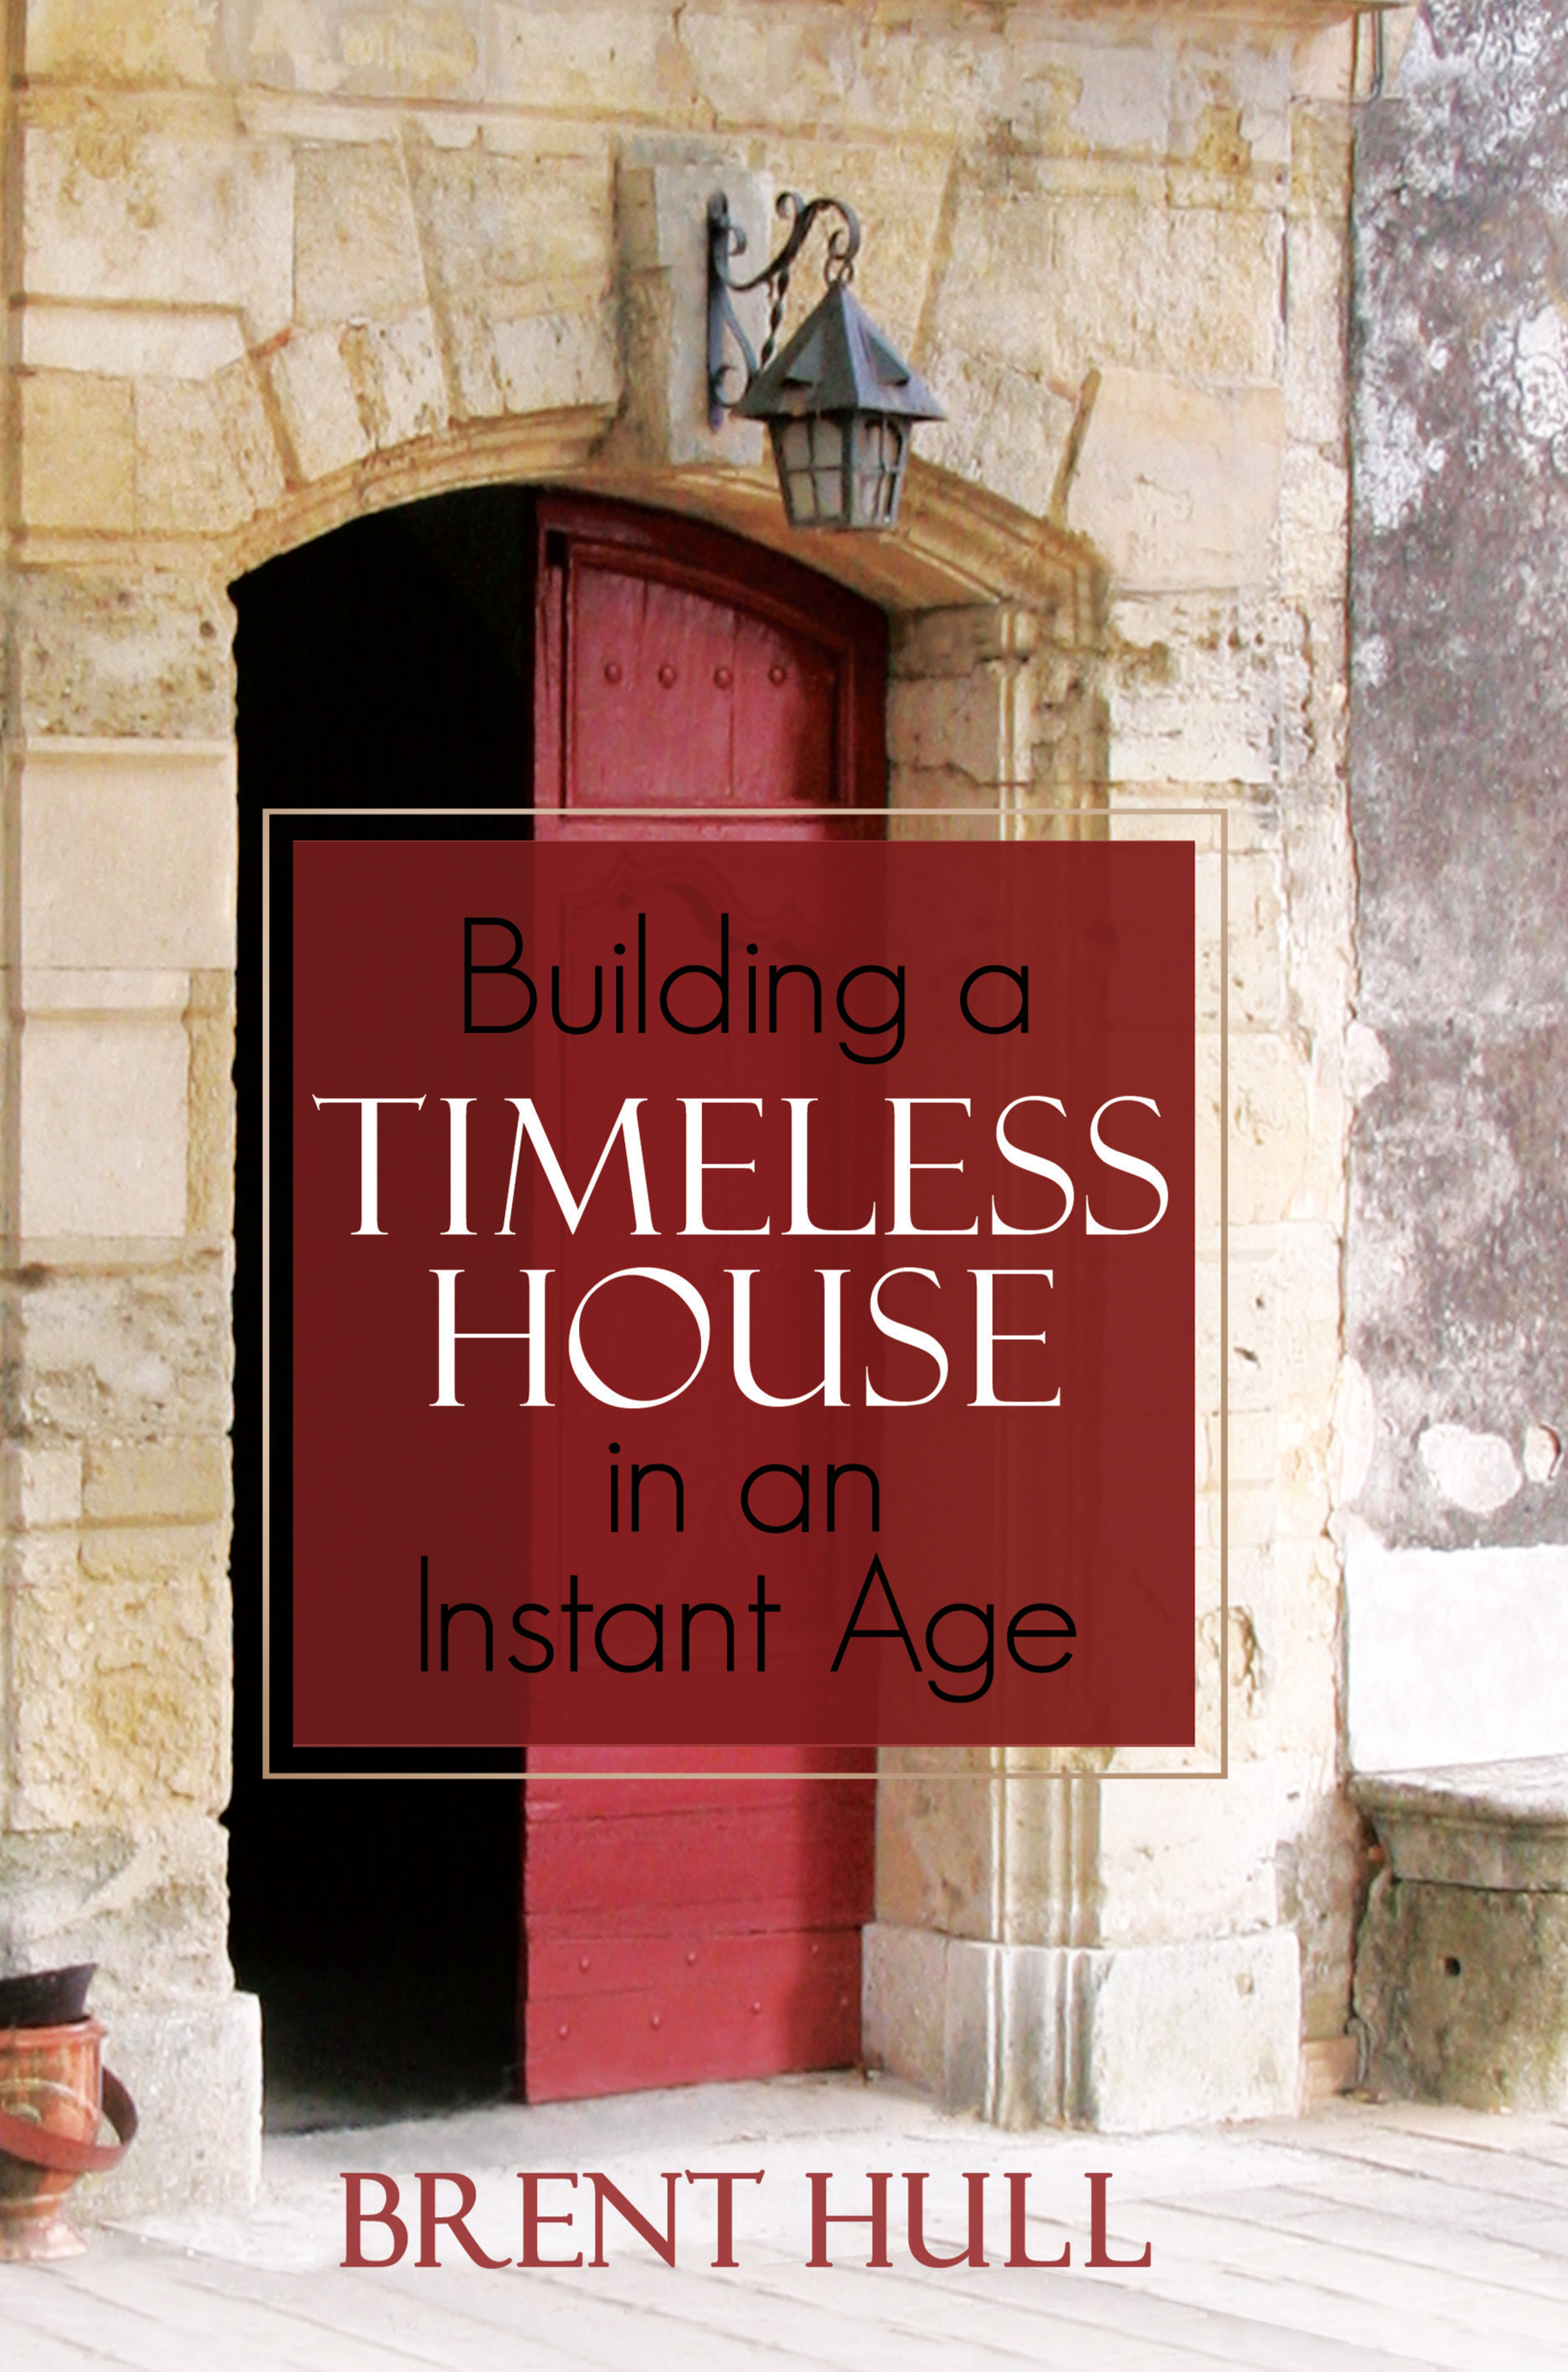 Invites readers to return to the art of building fine homes through fine craftsmanship, style and design